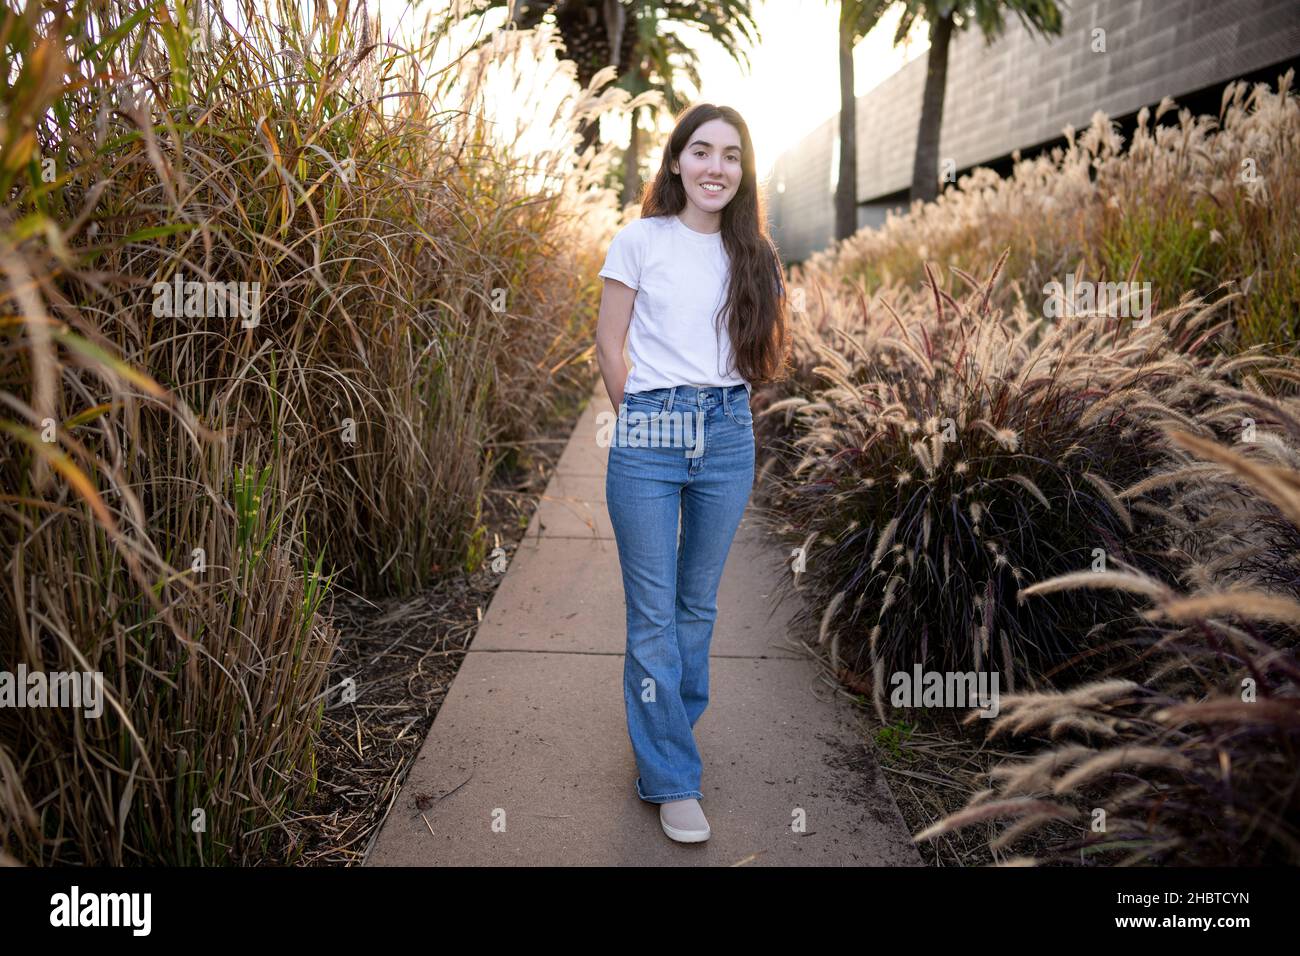 Teenage Woman Standing in Walkway Surrounded by Fountain Grass Stock Photo